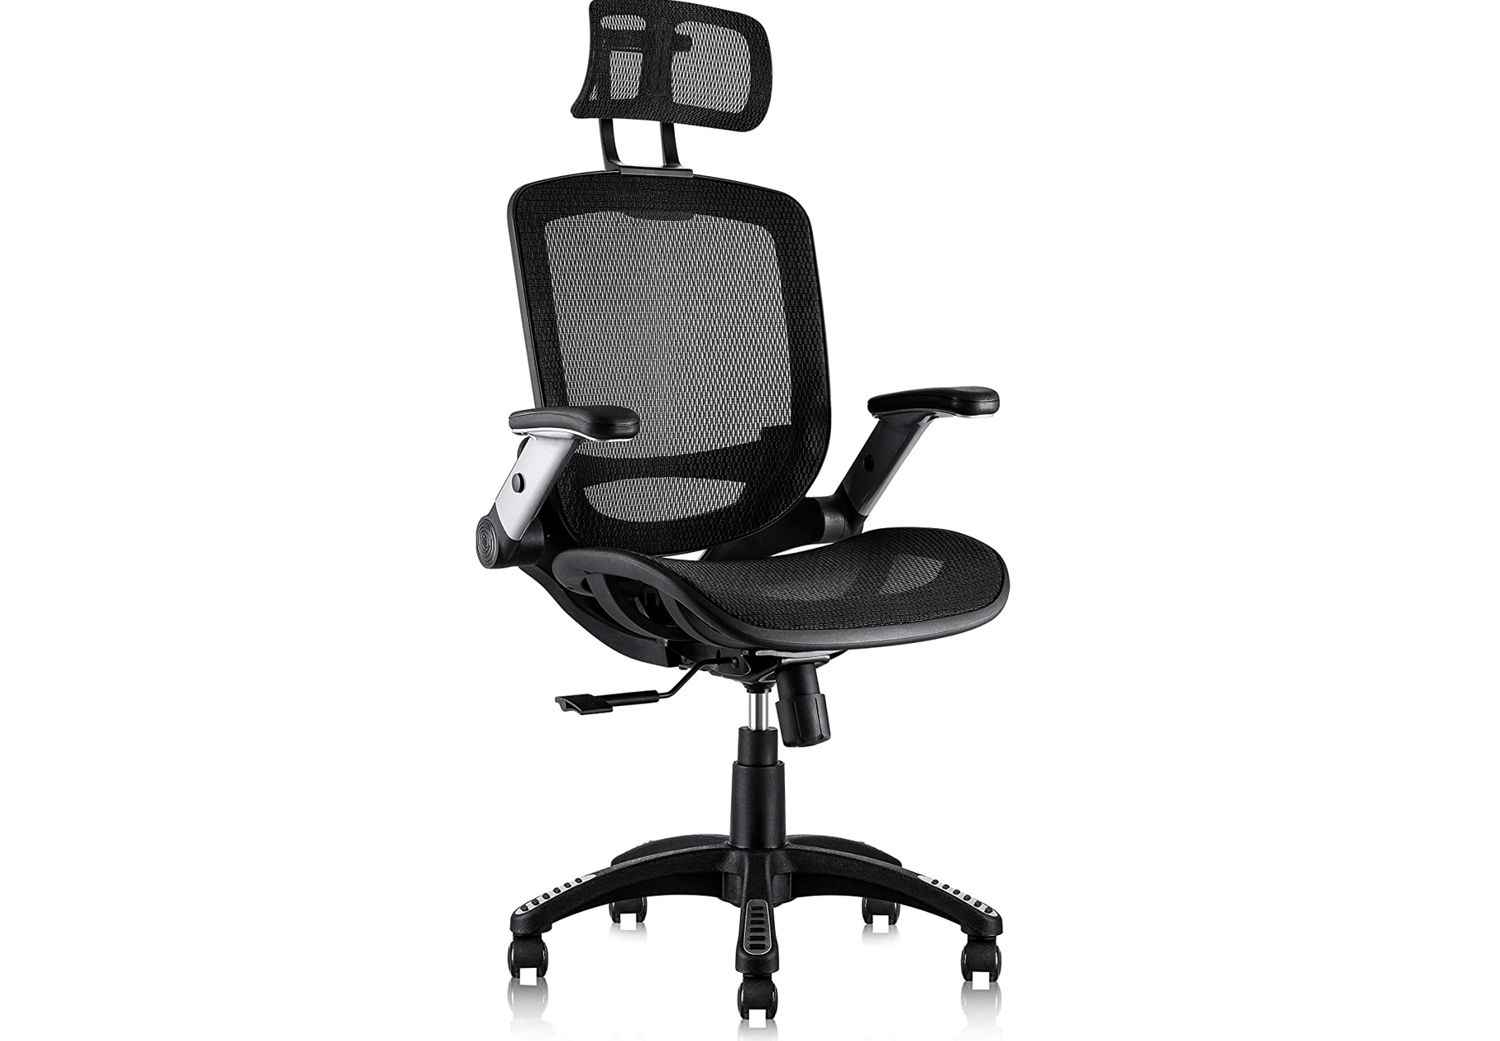 The NetDigz Editors rate the Gabrylly Mesh as the Optional Best Desk Chair for the money.